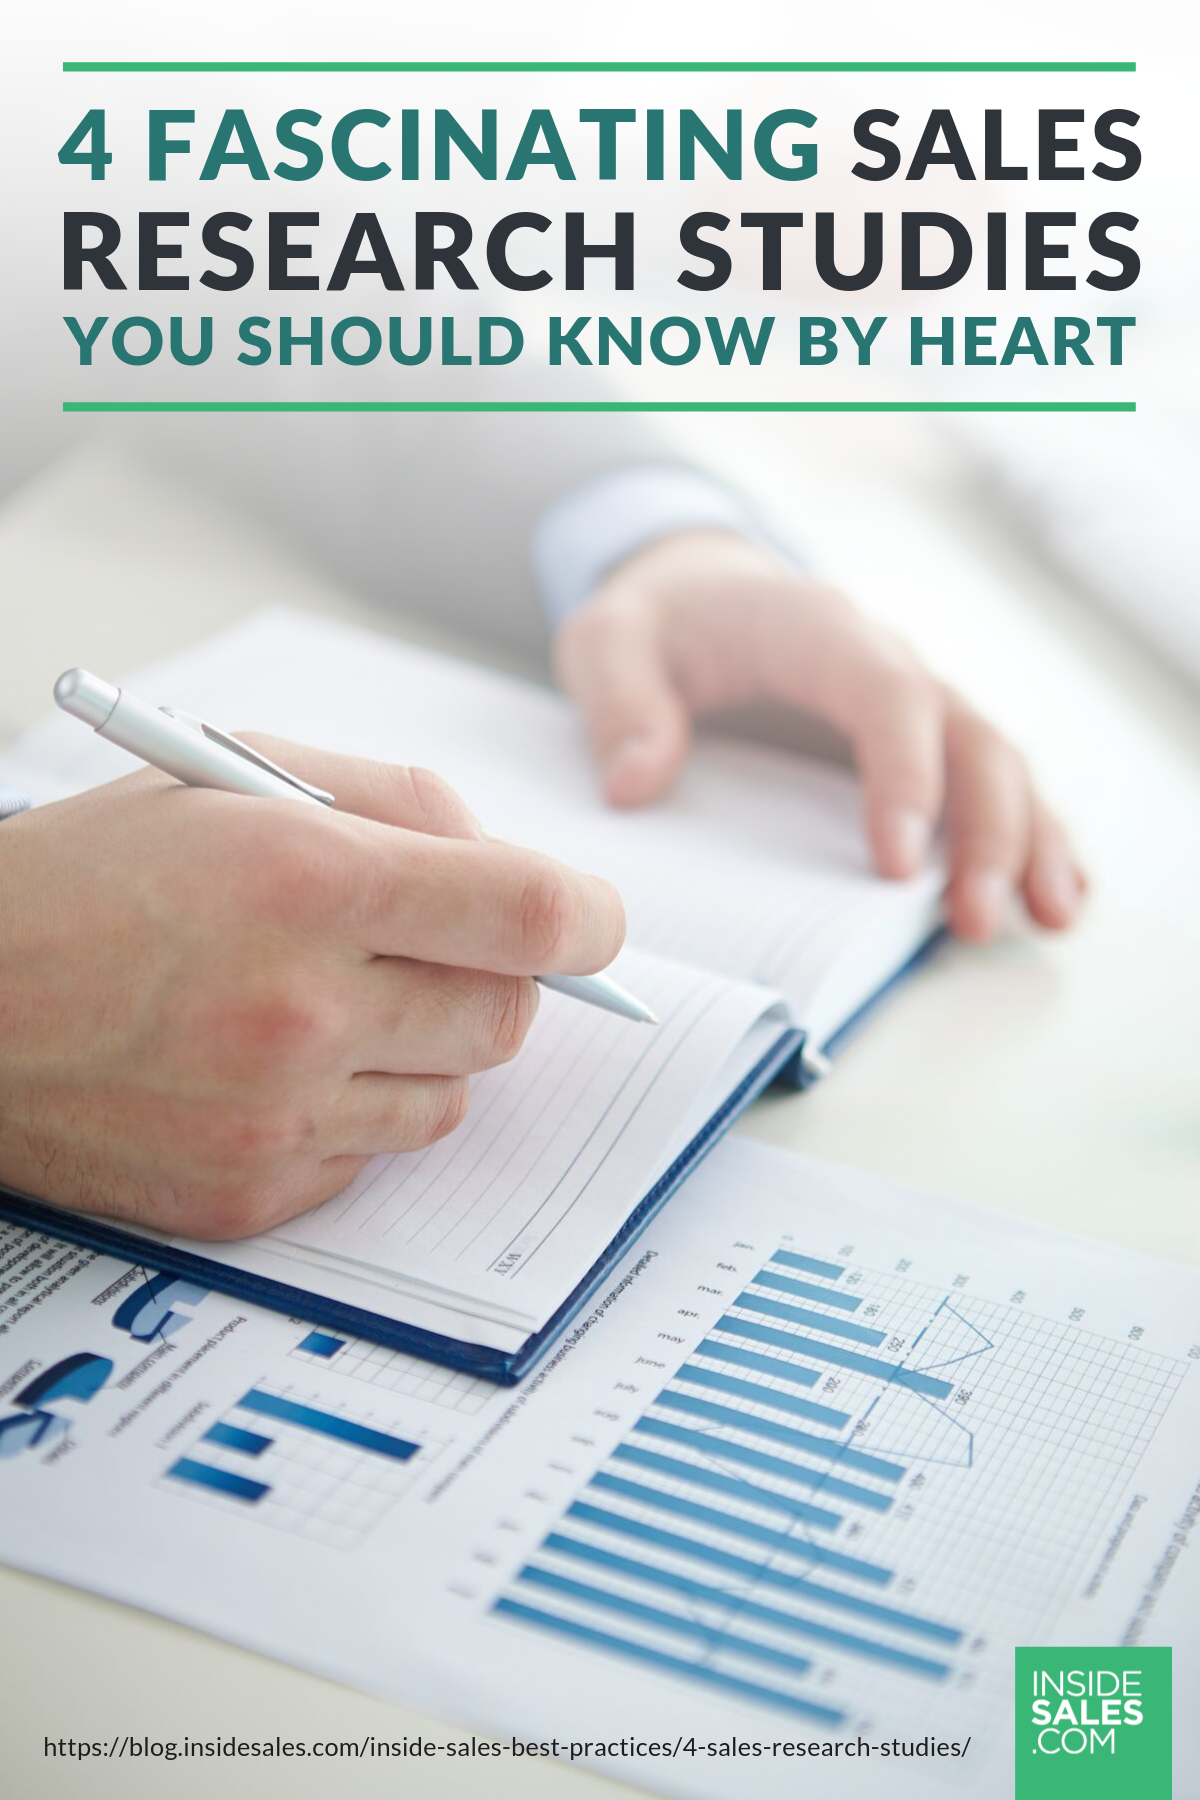 4 Fascinating Sales Research Studies You Should Know By Heart https://resources.insidesales.com/blog/inside-sales-best-practices/4-sales-research-studies/